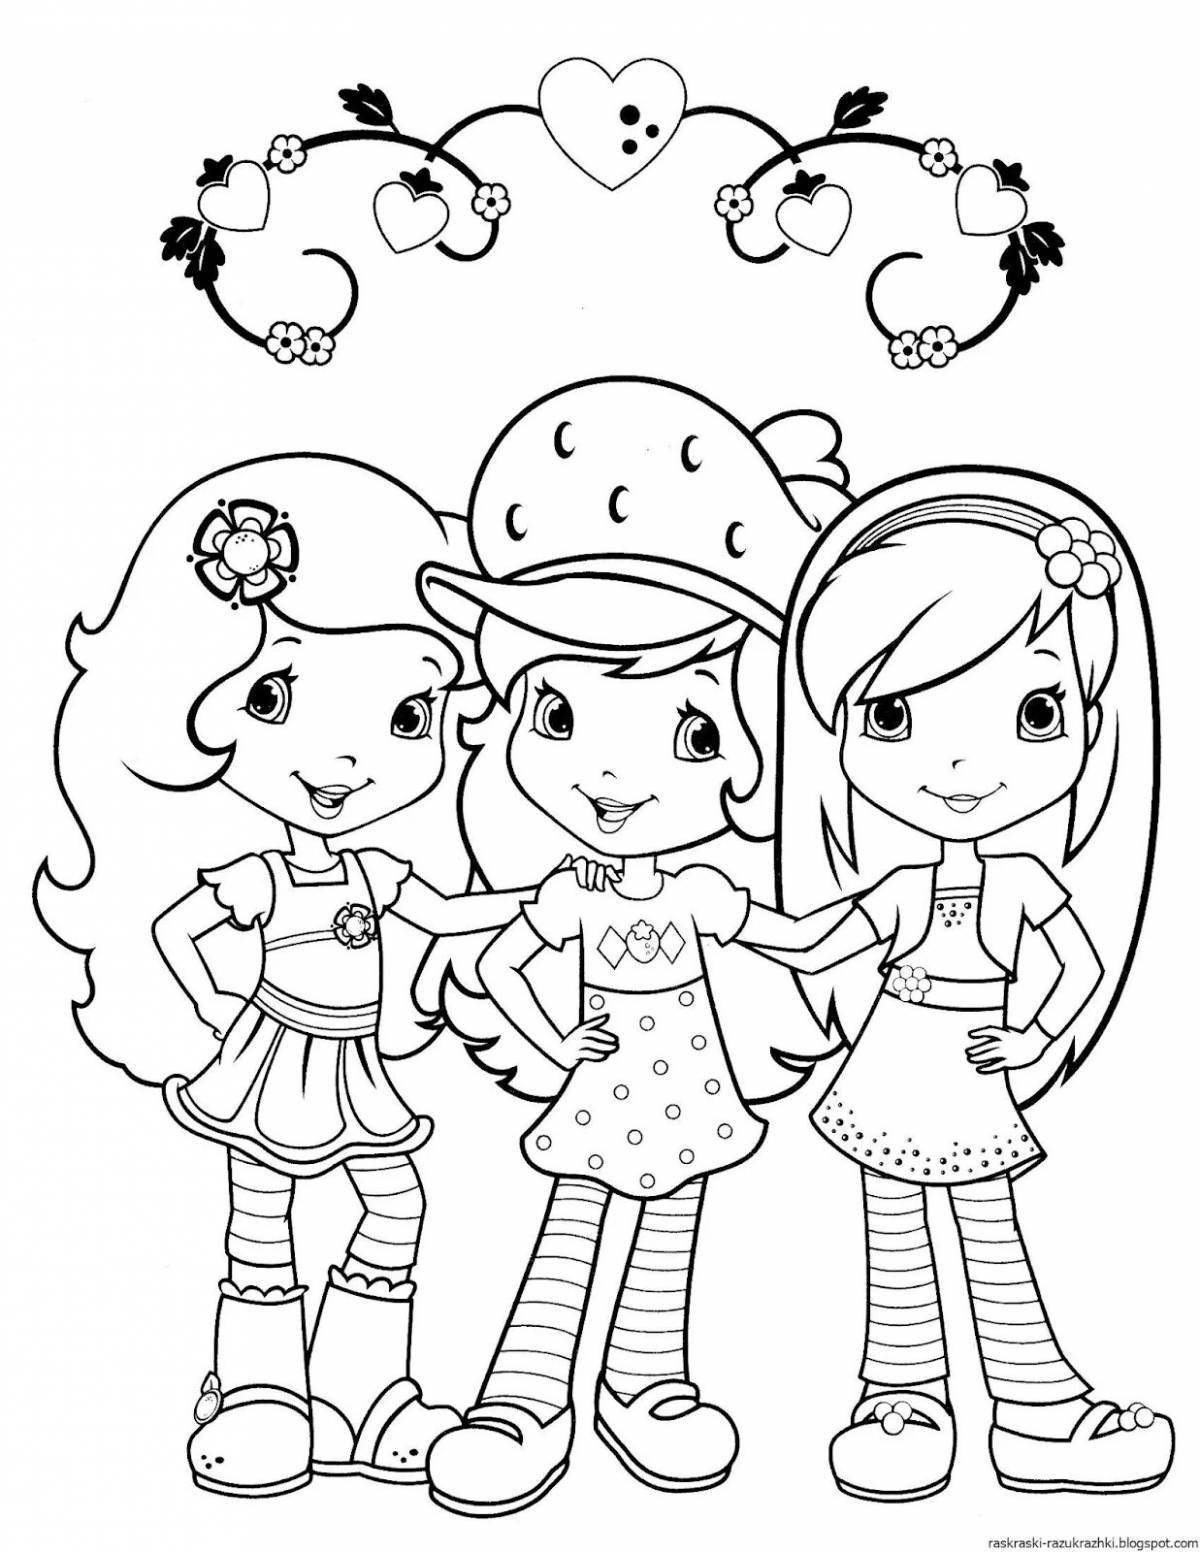 Attractive coloring game for girls